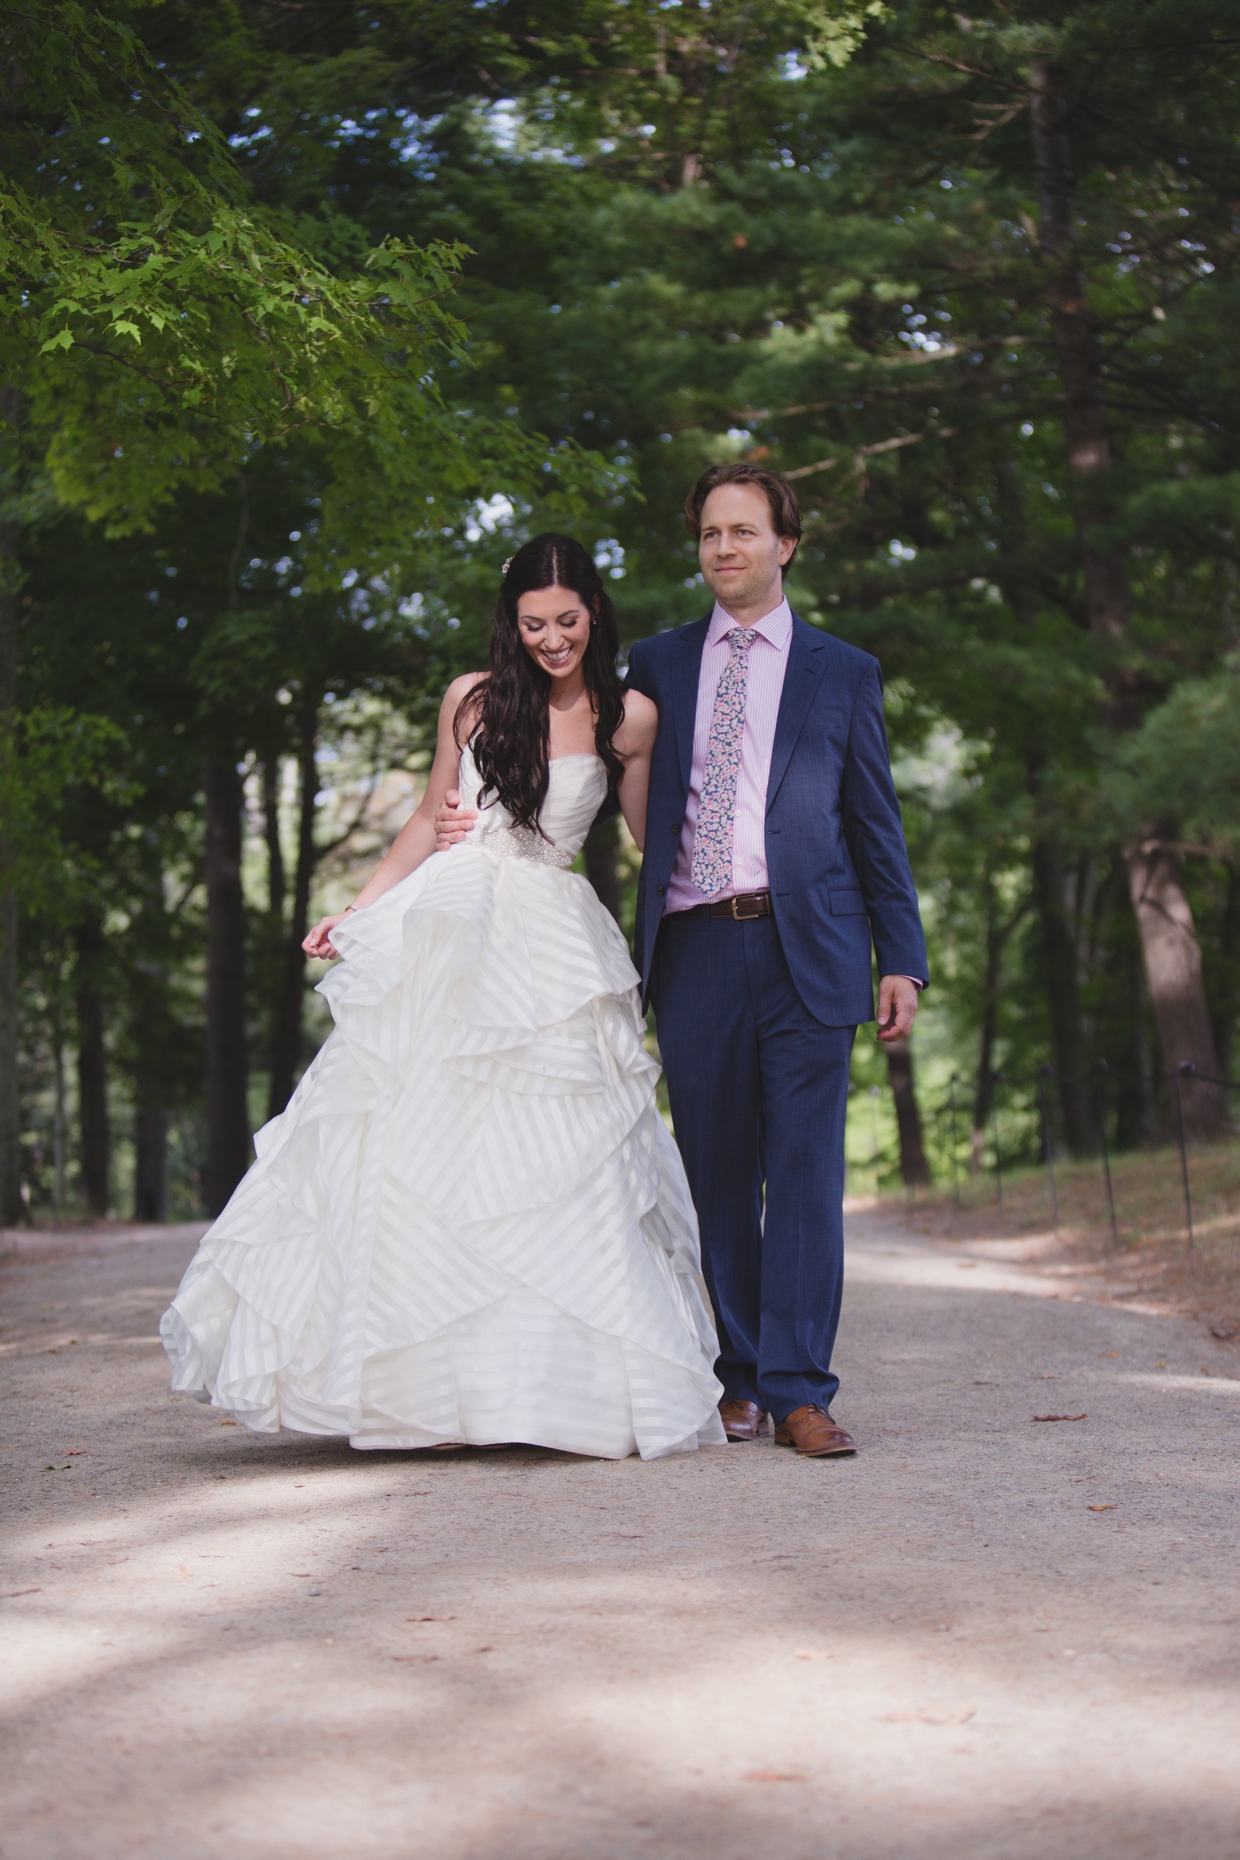 A natural portrait of a bride and groom walking in the Minute Man Park during their first look